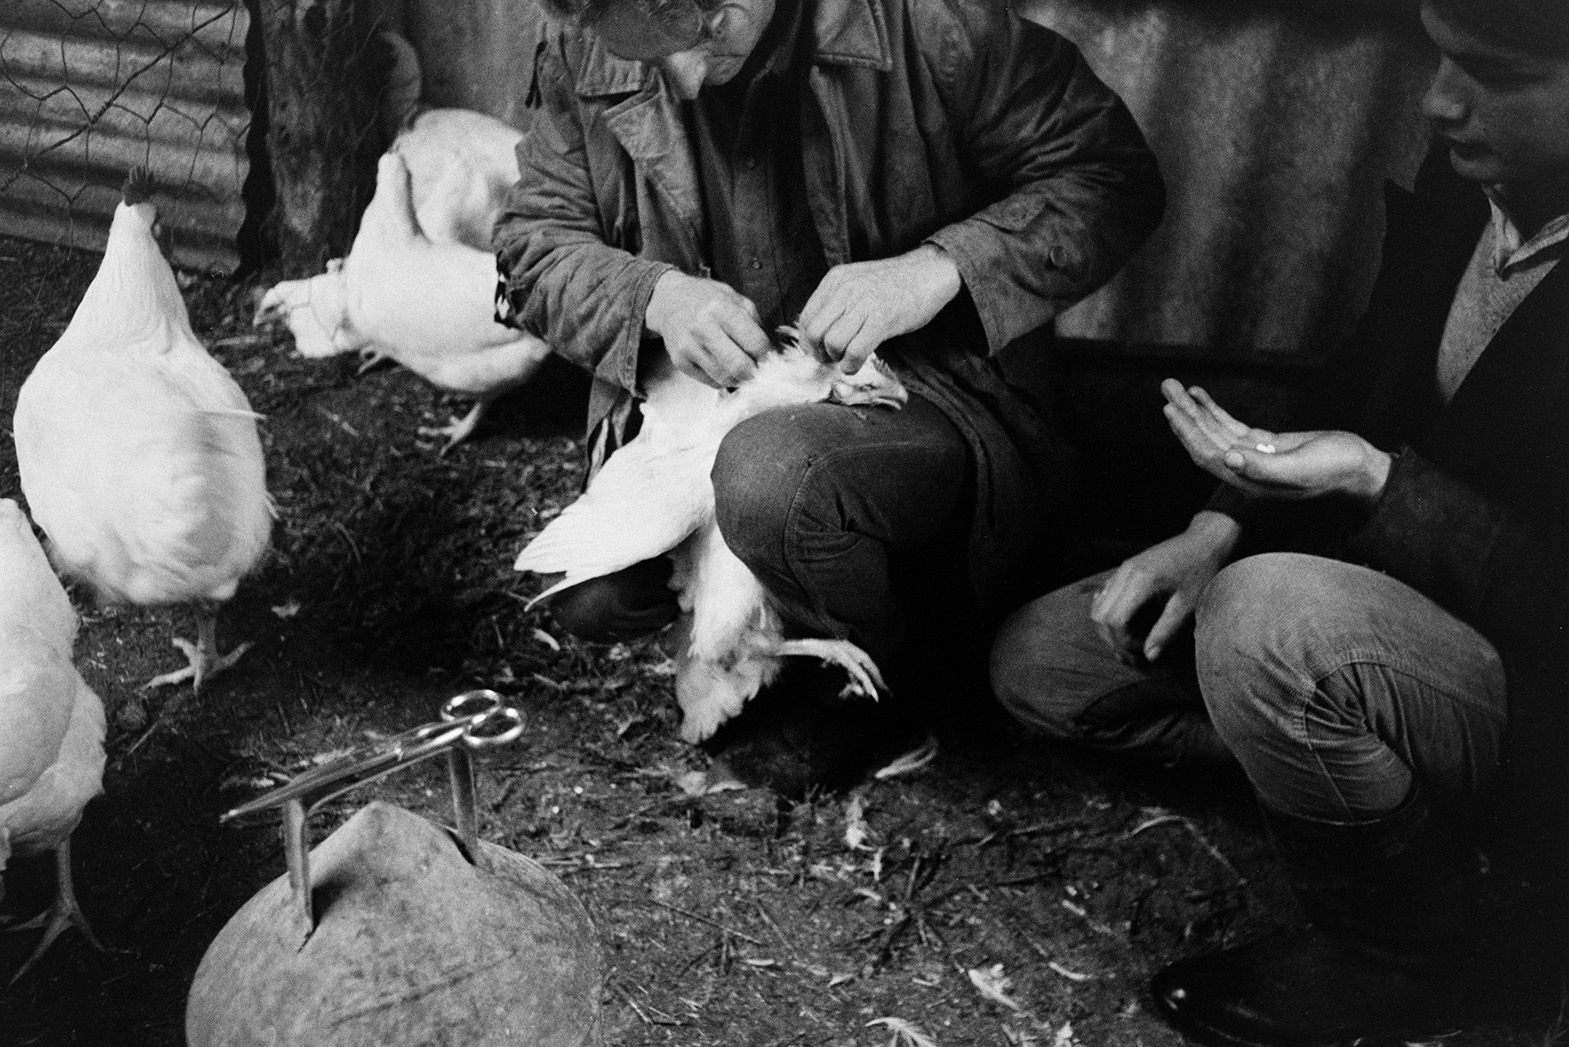 Ivor Bourne, on the left, and Derek Bright clipping the wings and caponising a cockerel in a shed at Mill Road Farm, Beaford. The farm was also known as Jeffrys.